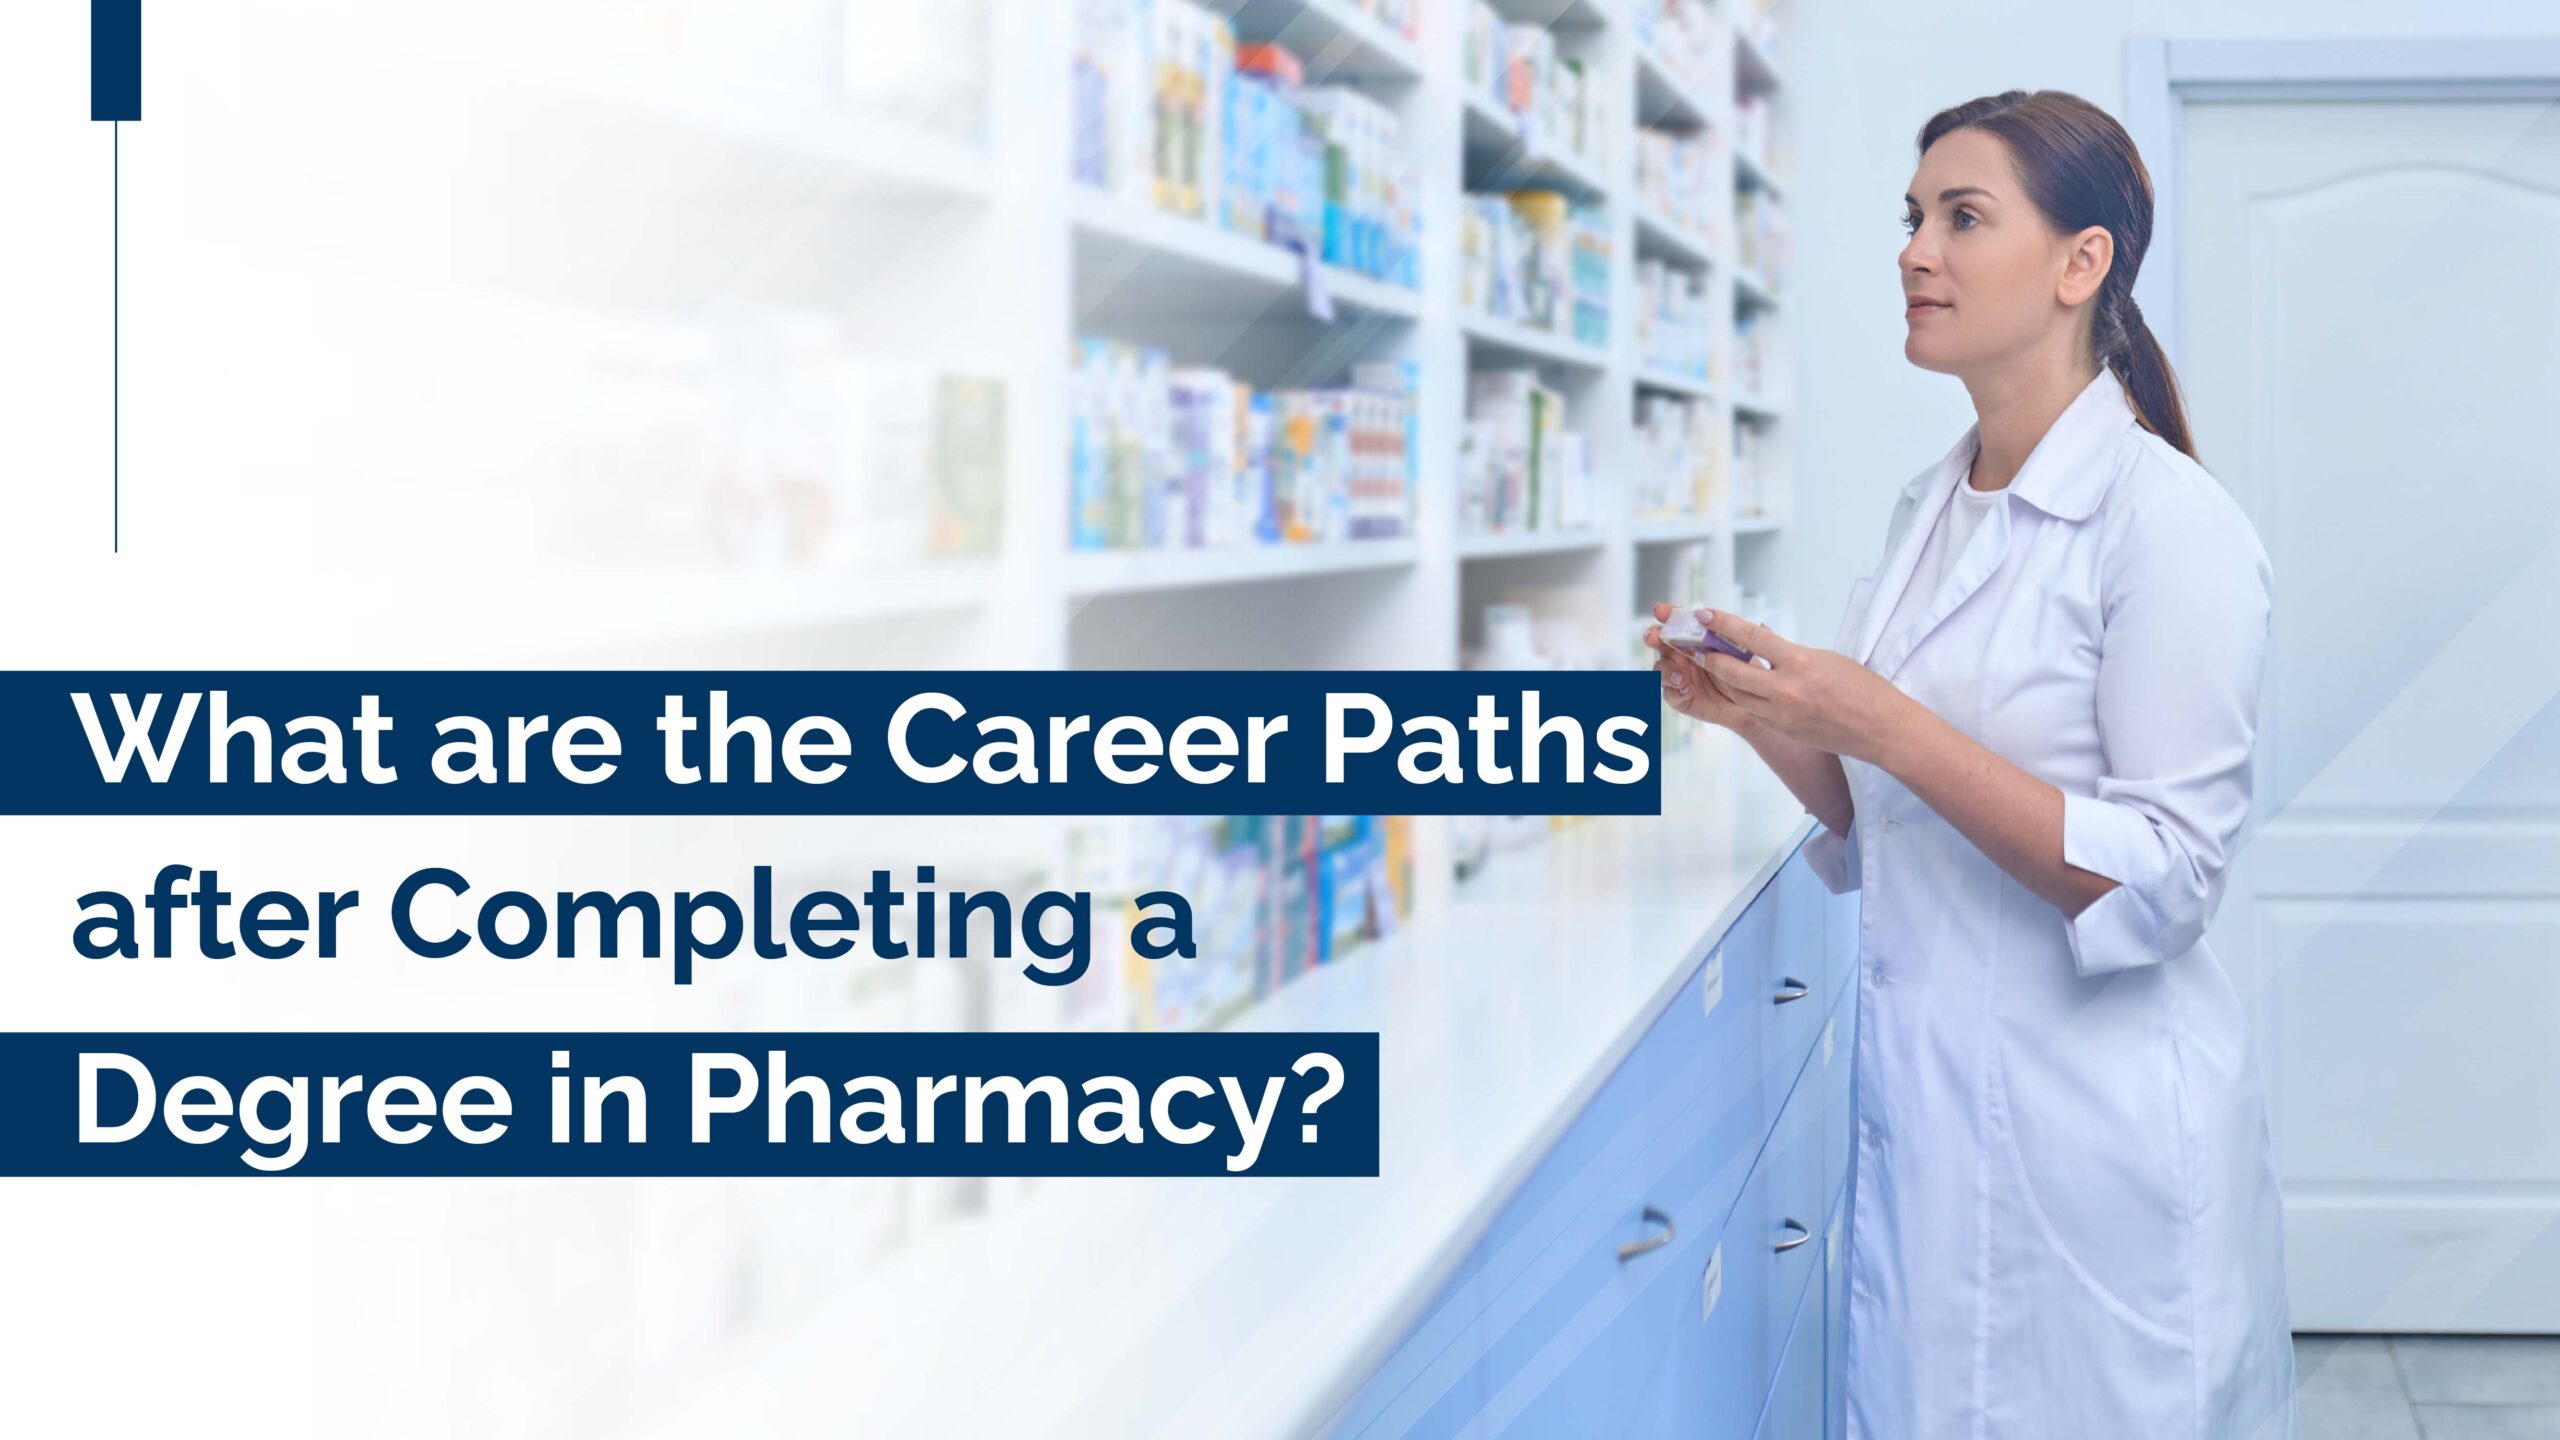 What are the Career Paths After Completing a Degree in Pharmacy?